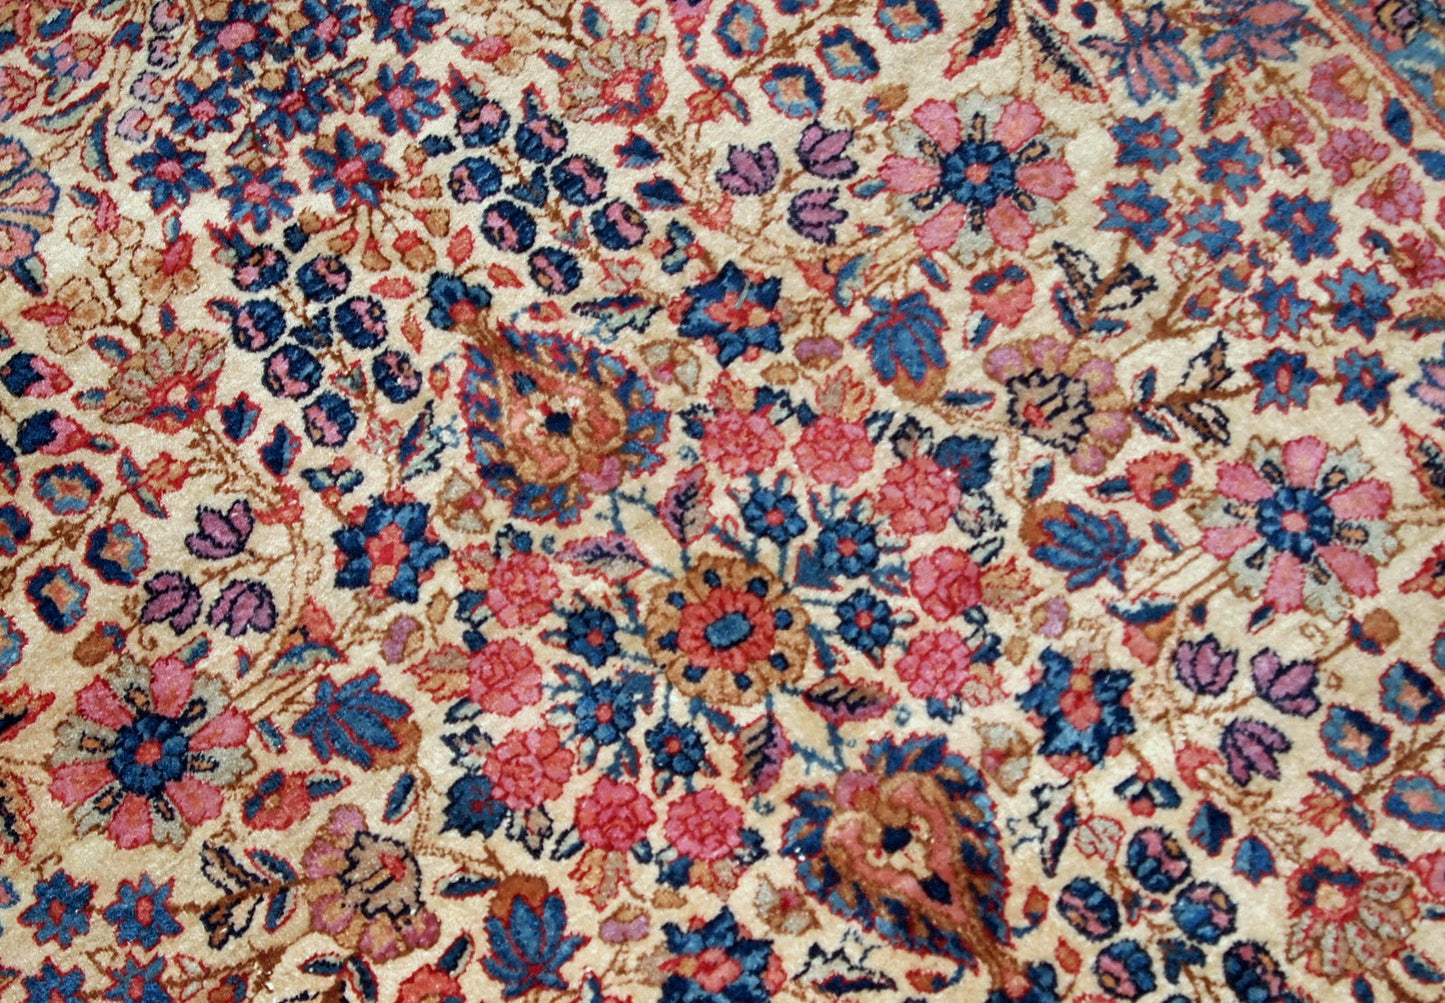 Hand-woven antique Kerman rug in original good condition, from the beginning of 20th century. The rug is in light shades and busy floral design.